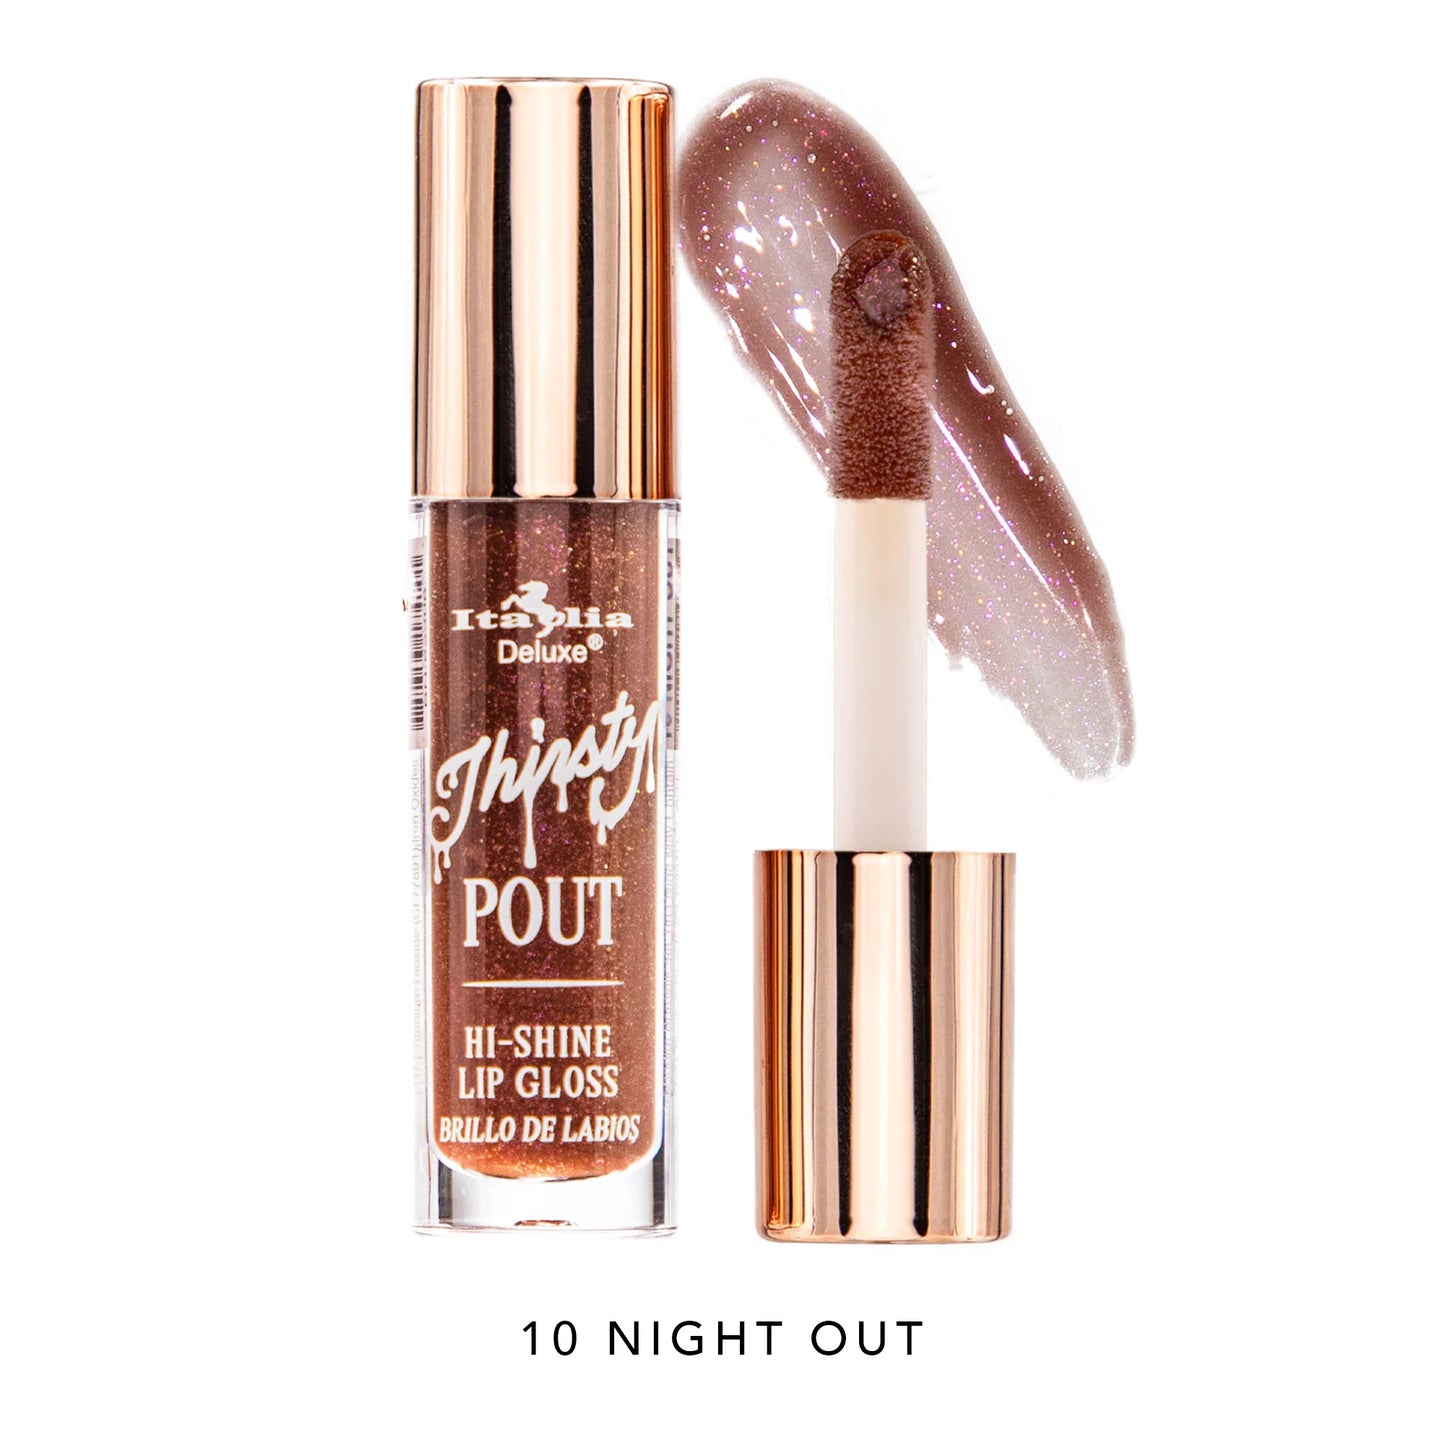 Thirsty Pout Hi-Shine Lip Gloss Italia Deluxe